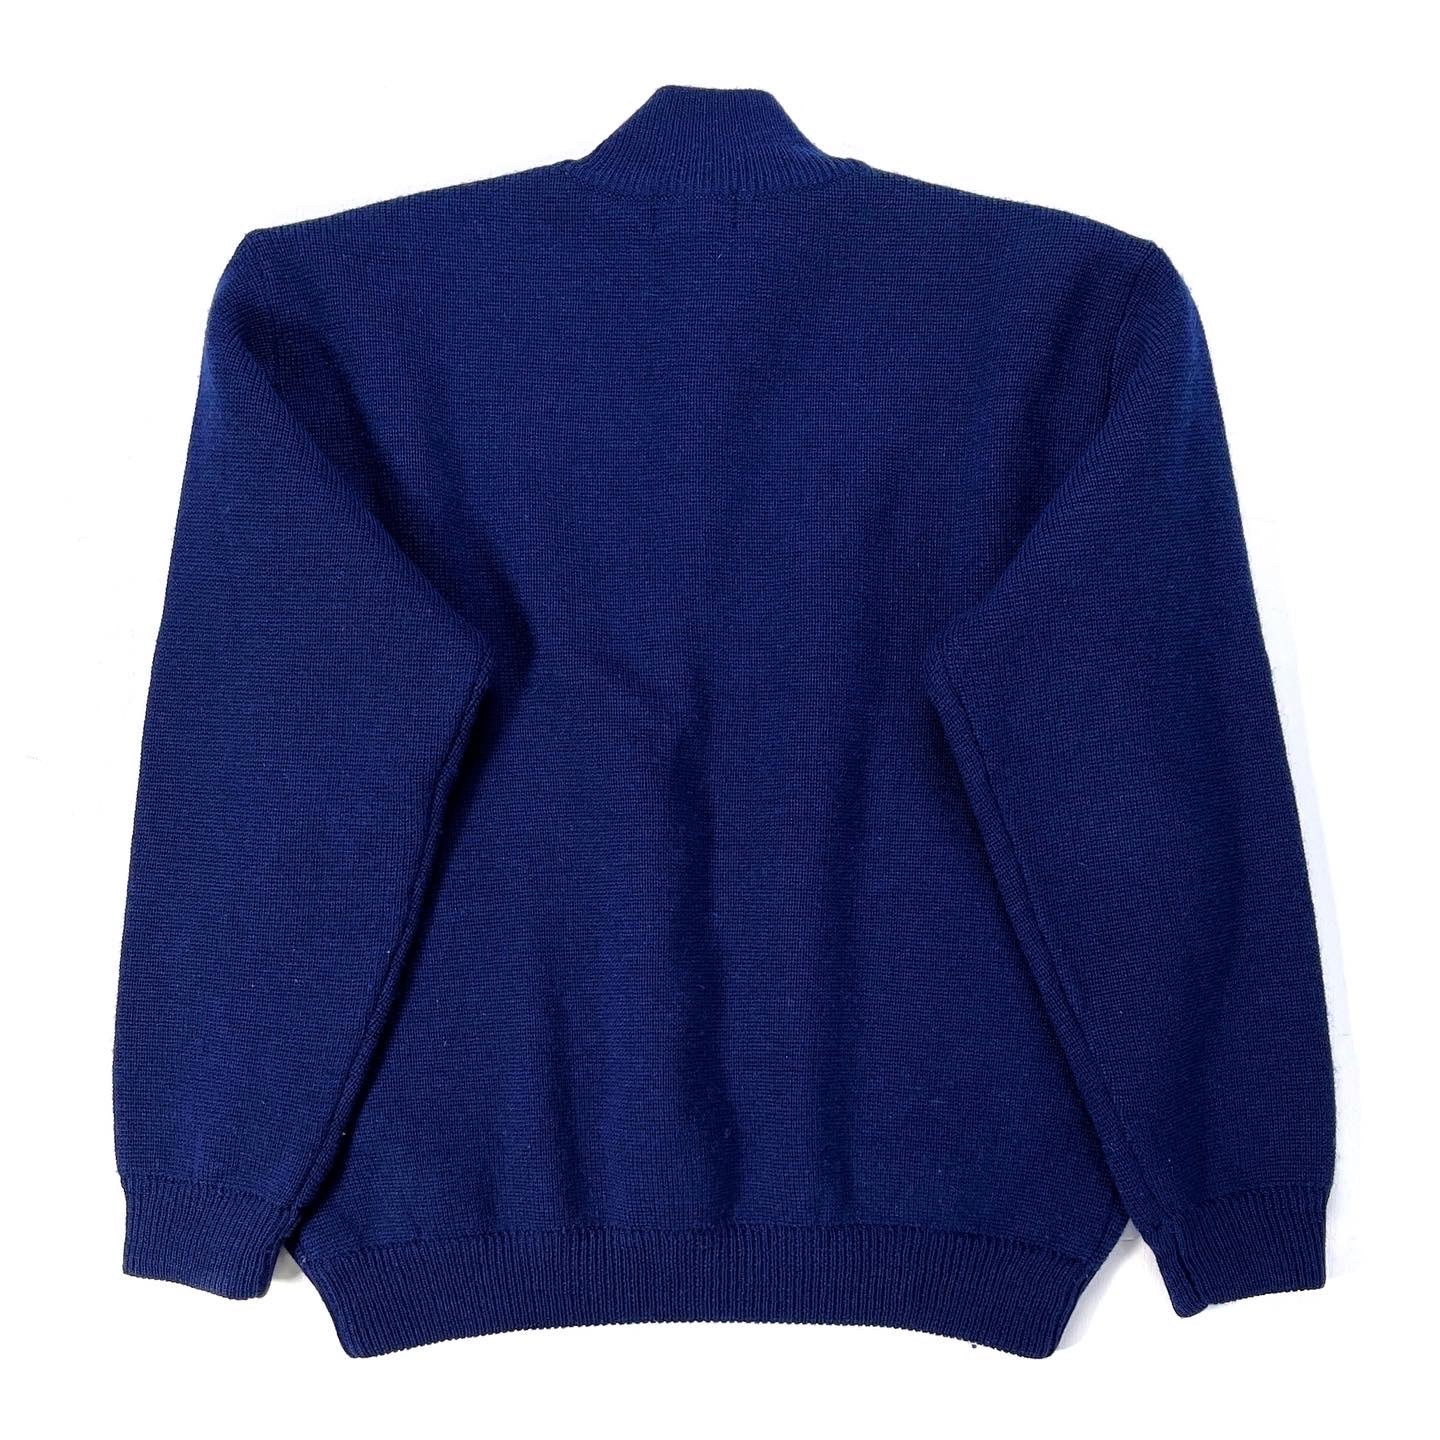 1998 Patagonia Alpiniste Wool Sweater, Classic Navy (M/L)